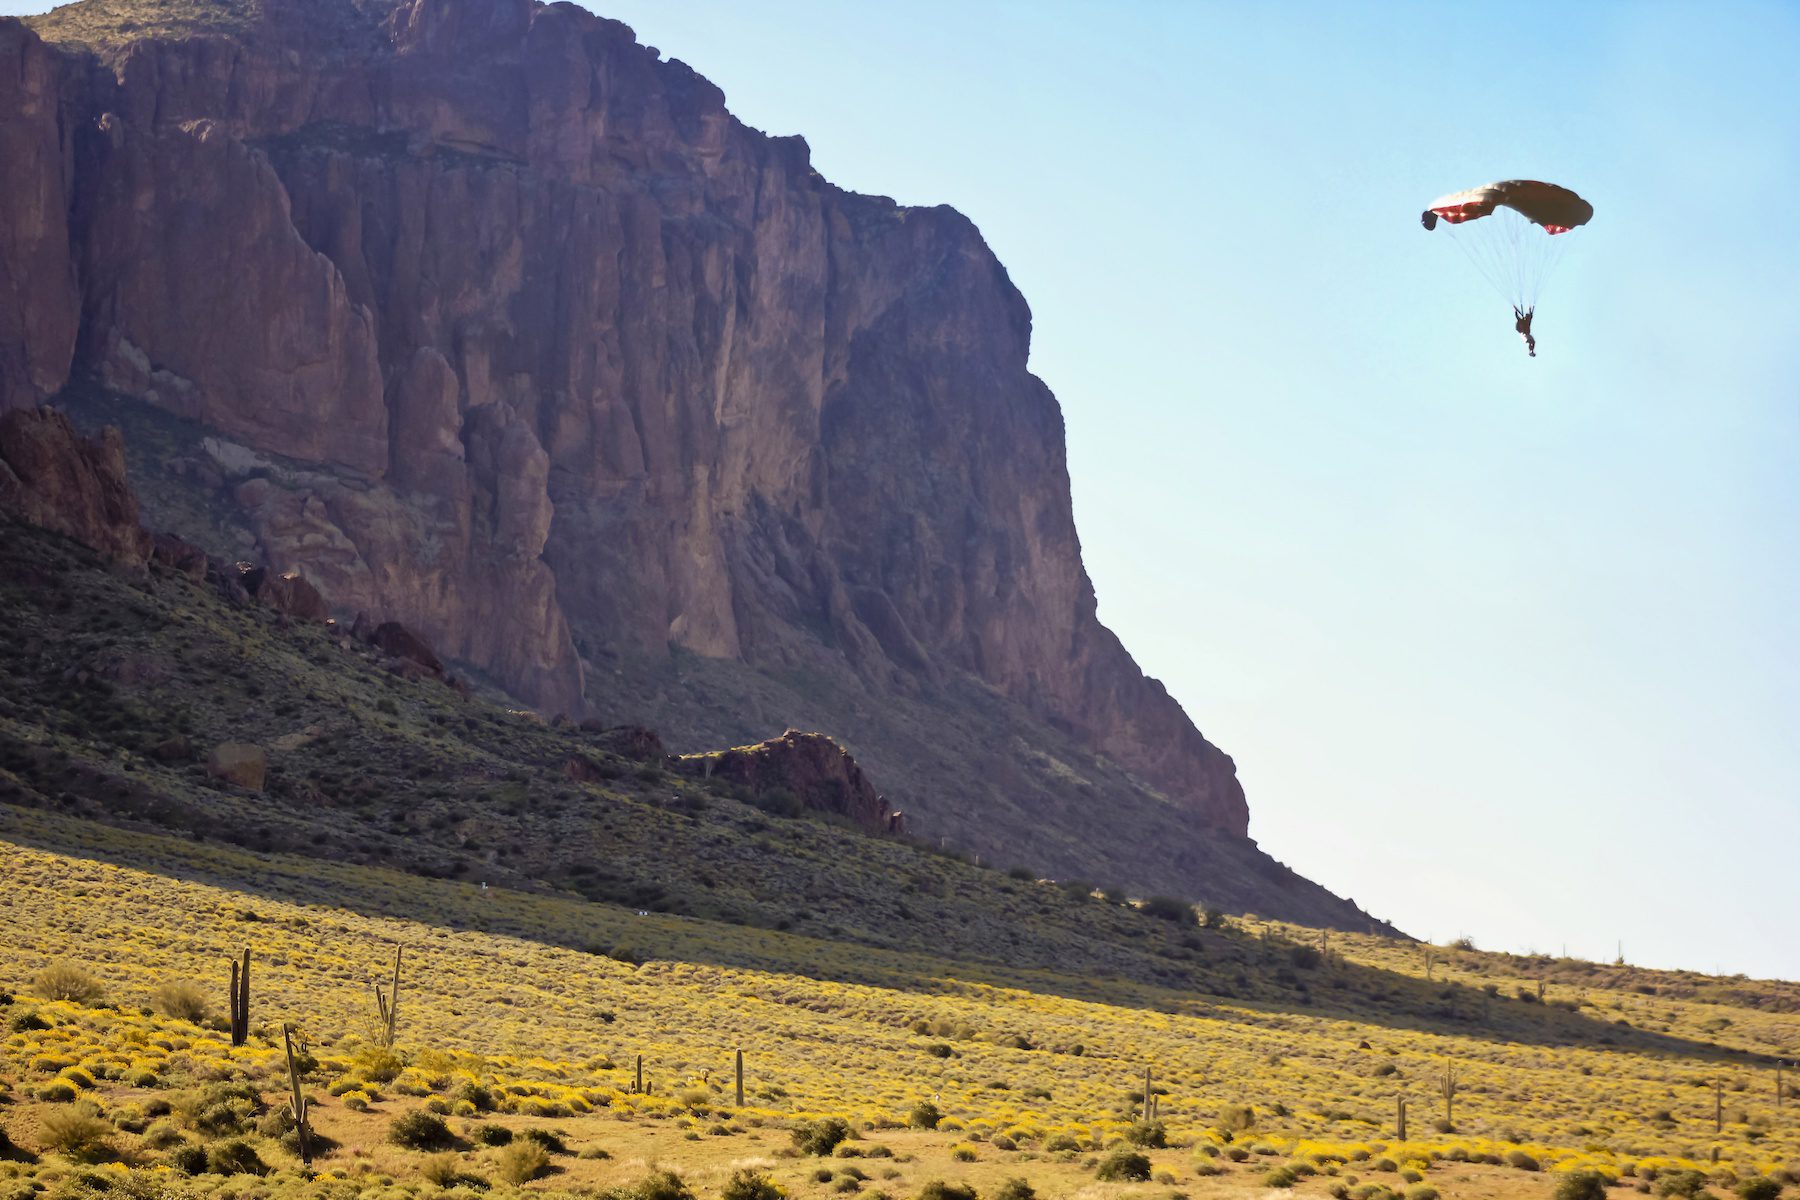 A paraglider is shown approaching landing in an open flat plain with a soaring cliff face in the background at Lost Dutchman State Park